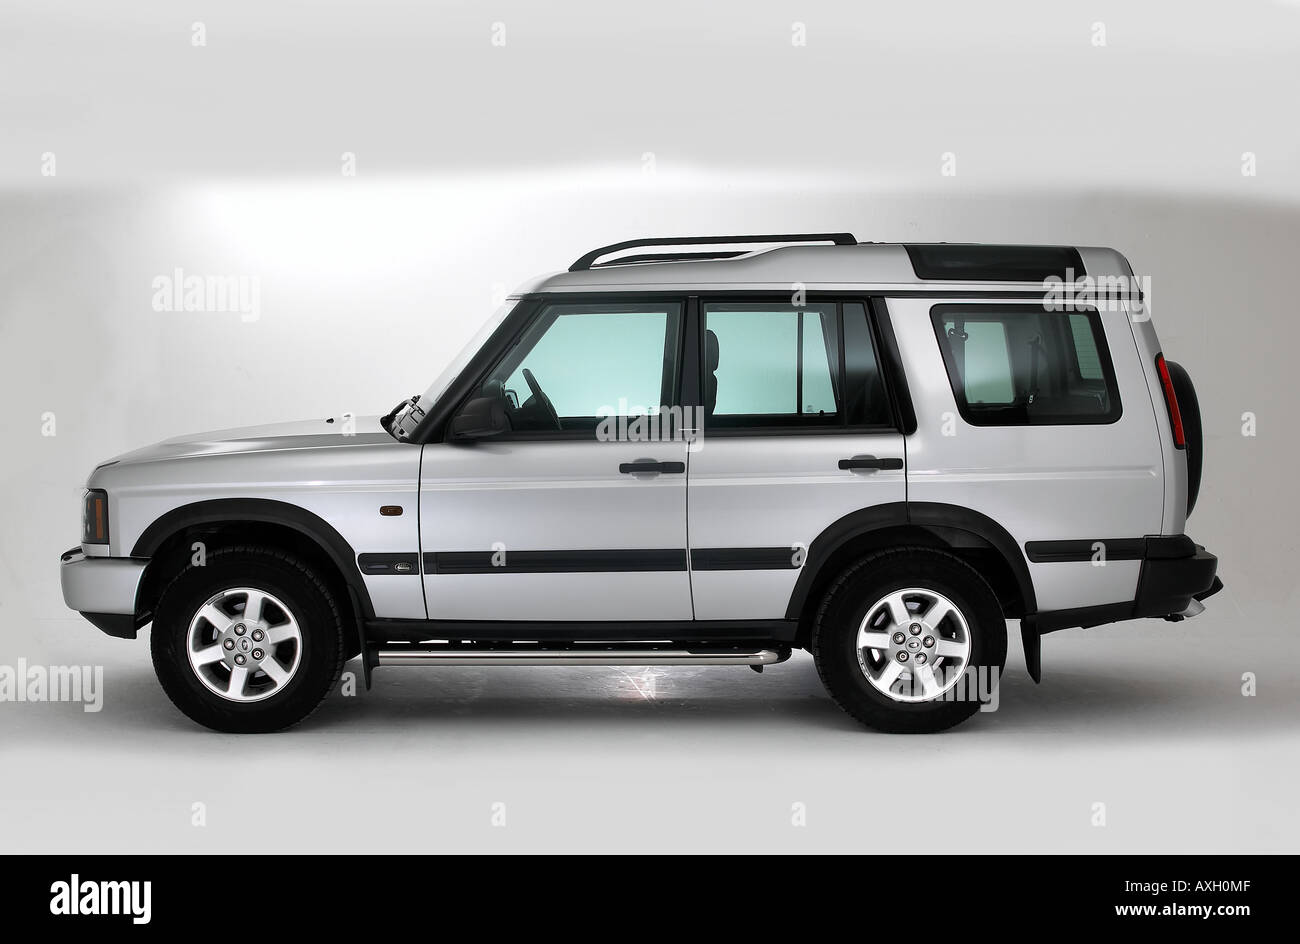 2003 Land Rover Discovery Foto Stock